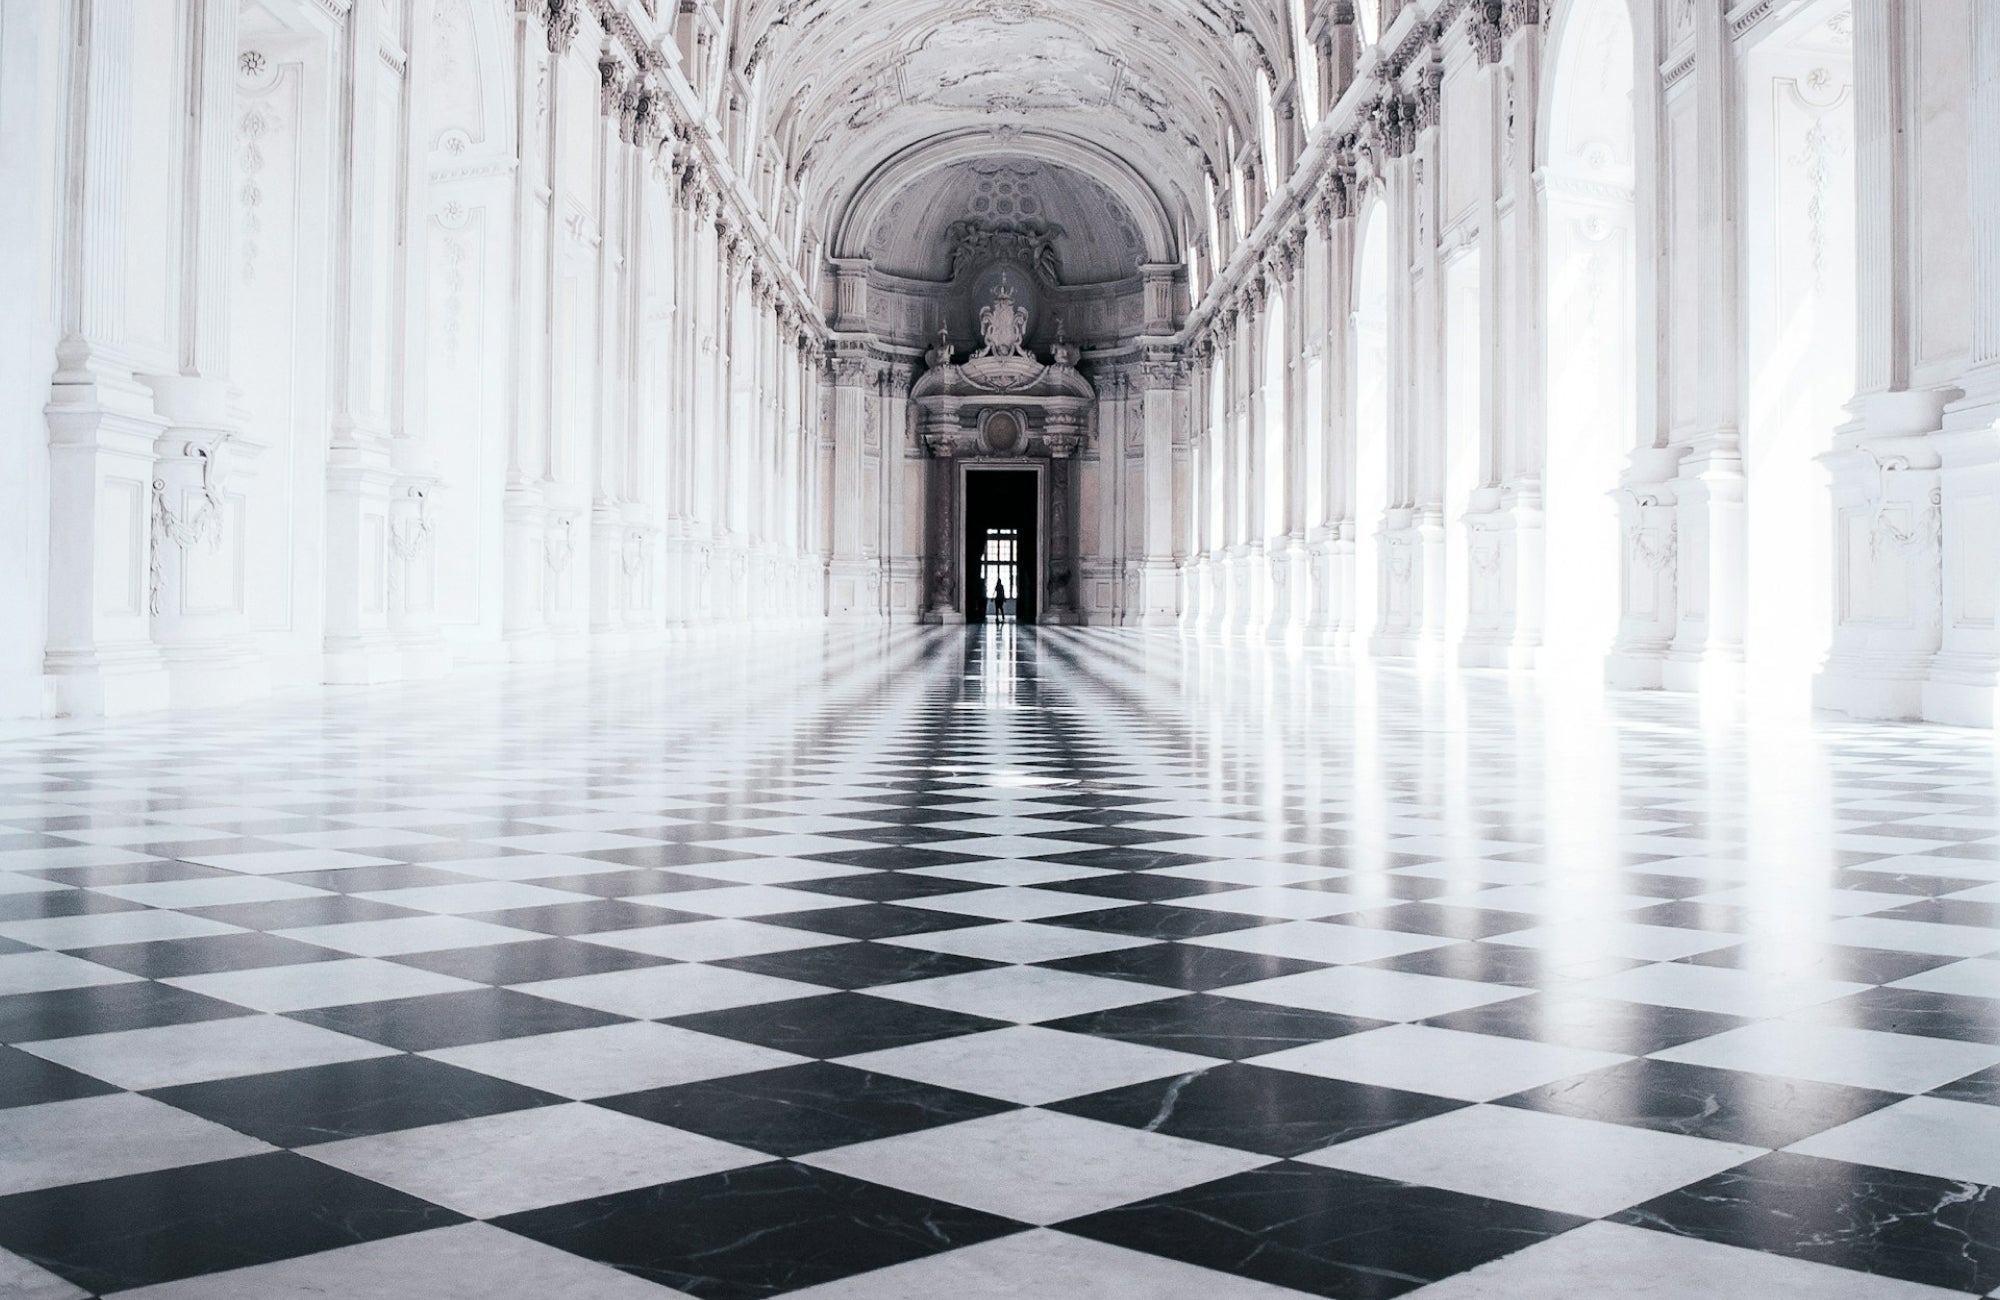 Majestic hallway with high vaulted ceilings, adorned with black and white checkered marble floors, leading to a grand doorway